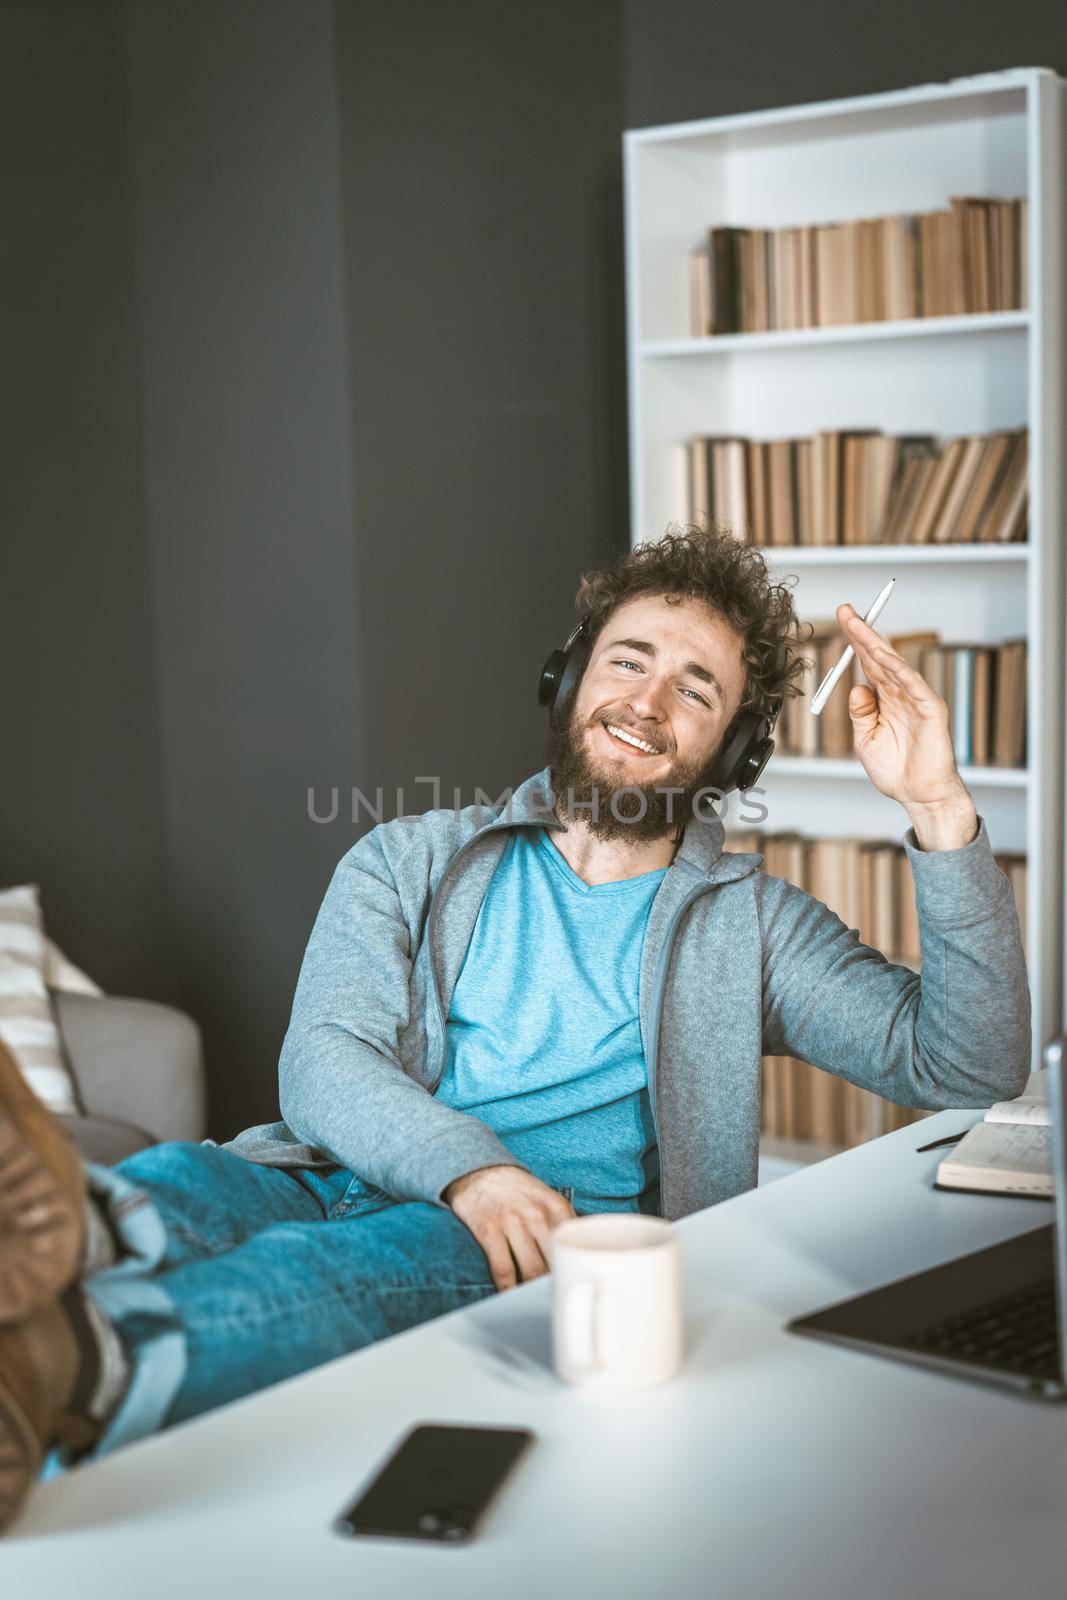 Happy student at home. Remote learning concept. Young man with headphones smiles sitting in front of a computer. High quality photo